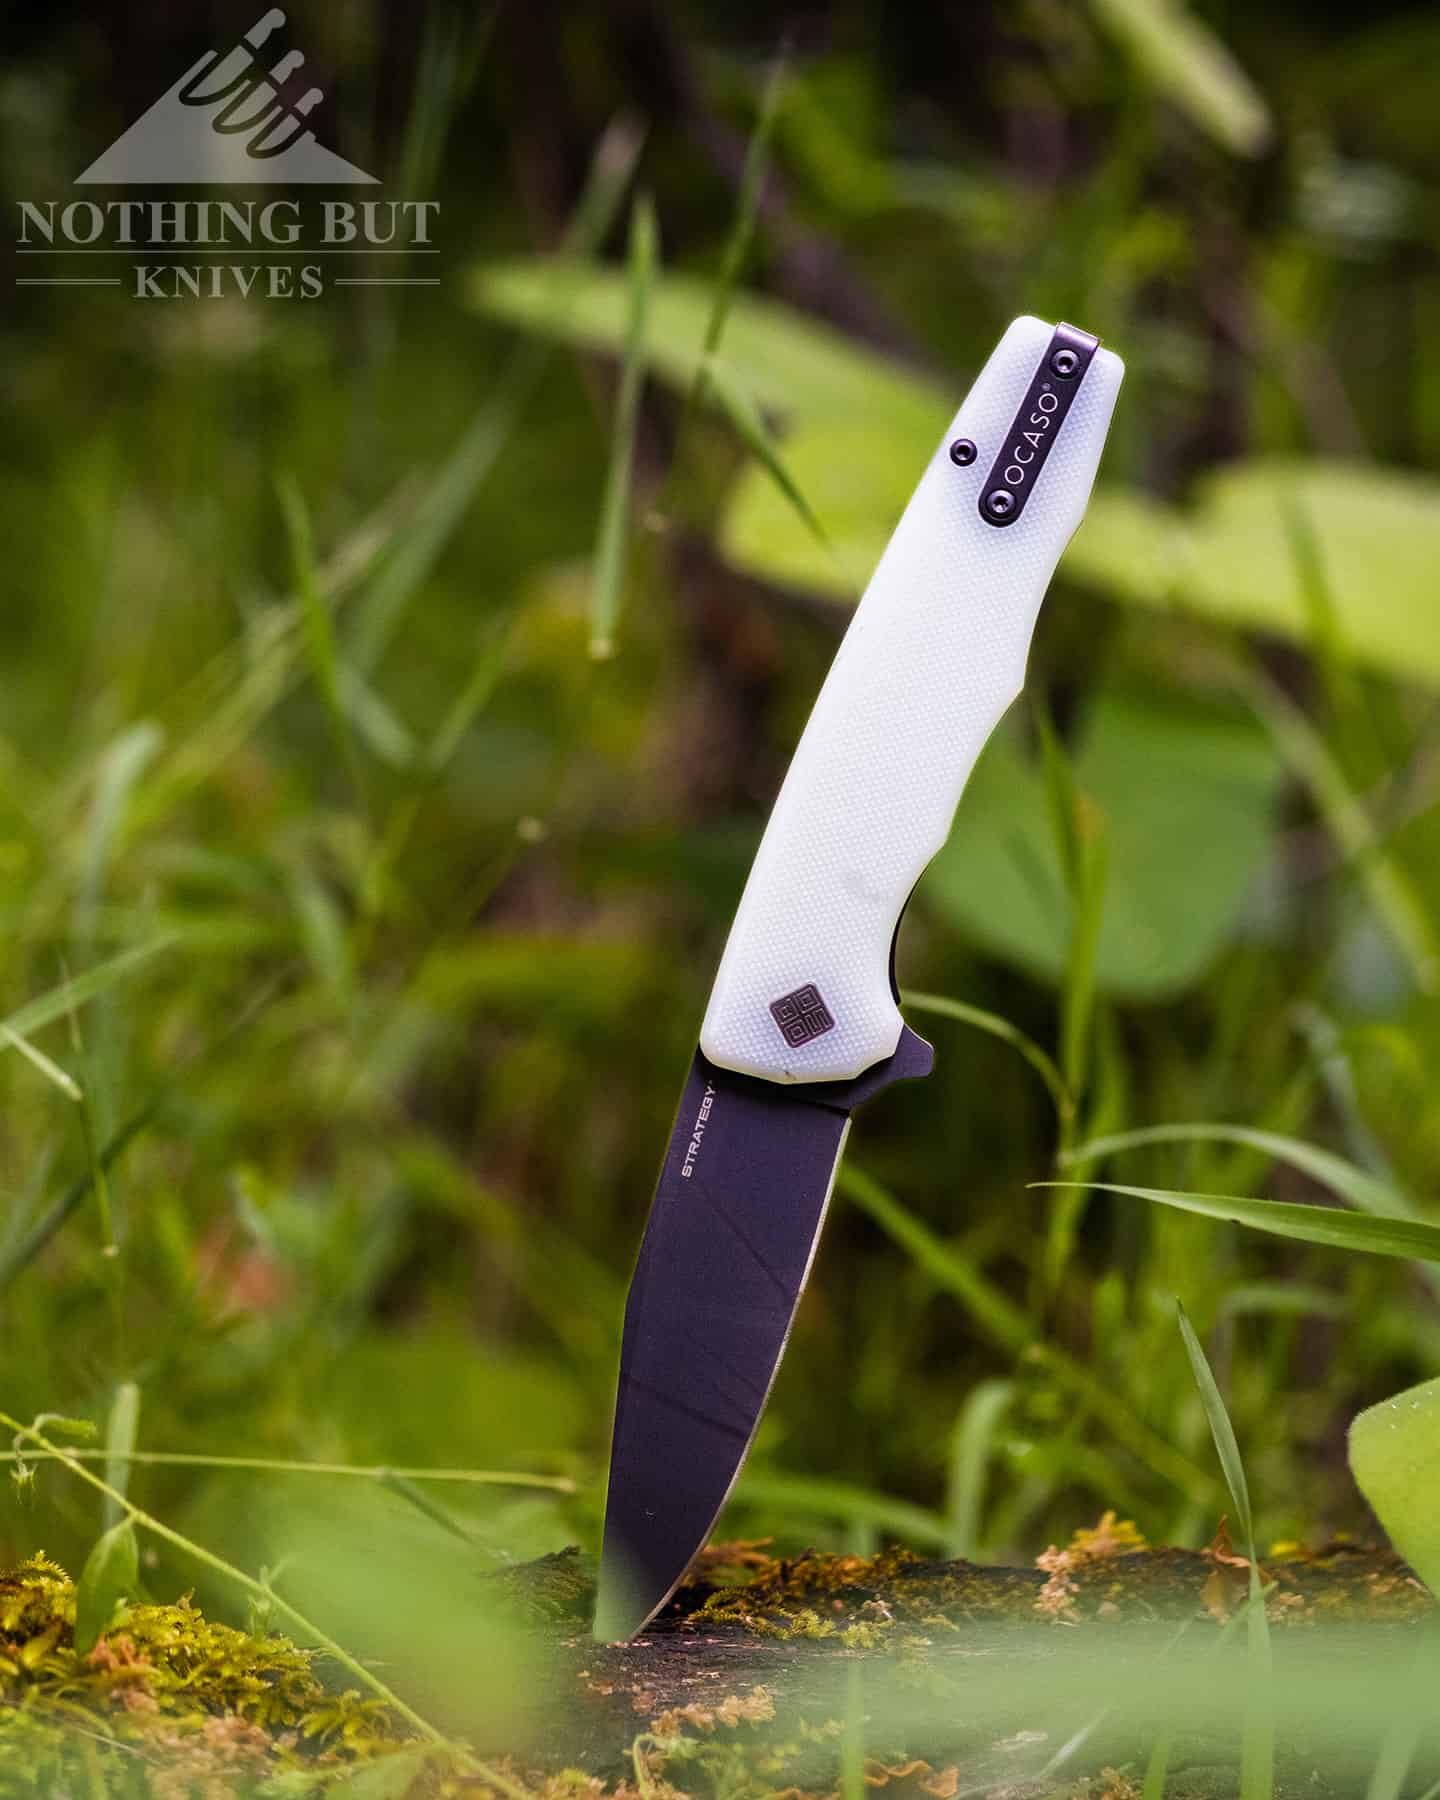 The Jade G10 version of the Strategy looks right at home in the great outdoors.